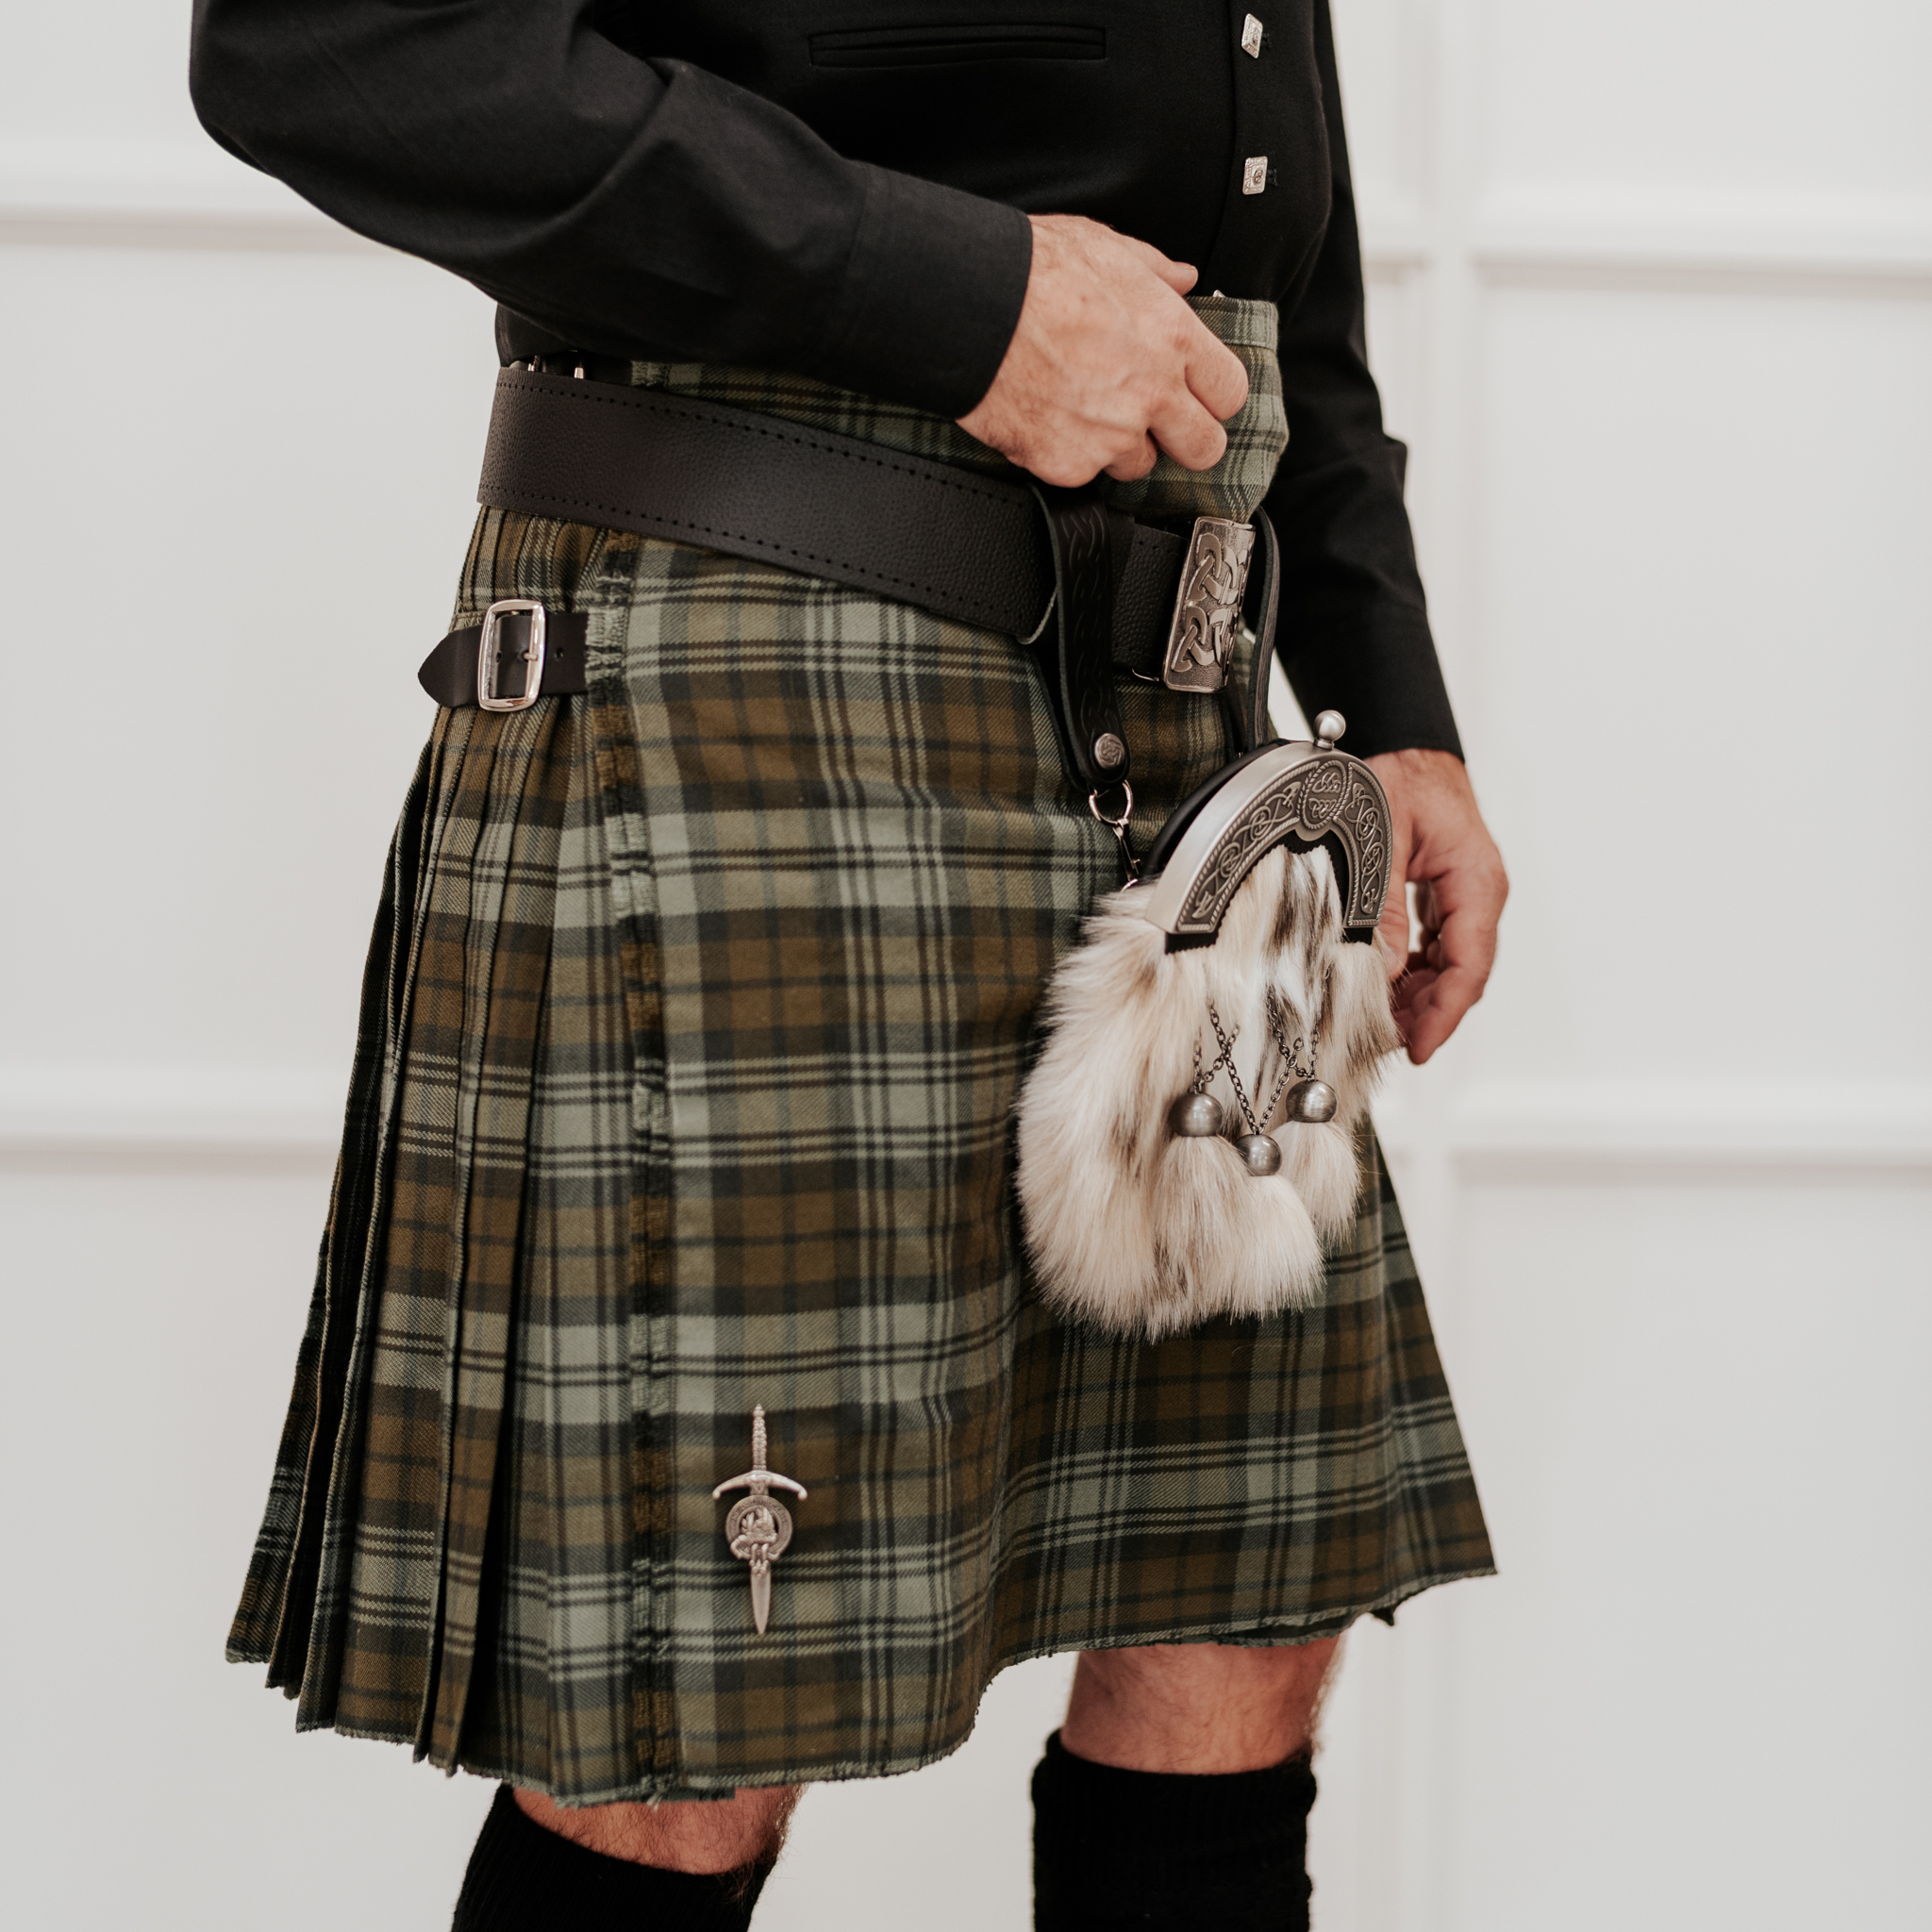 Selection Order kilt sale Largest your of today available Kilts - for online